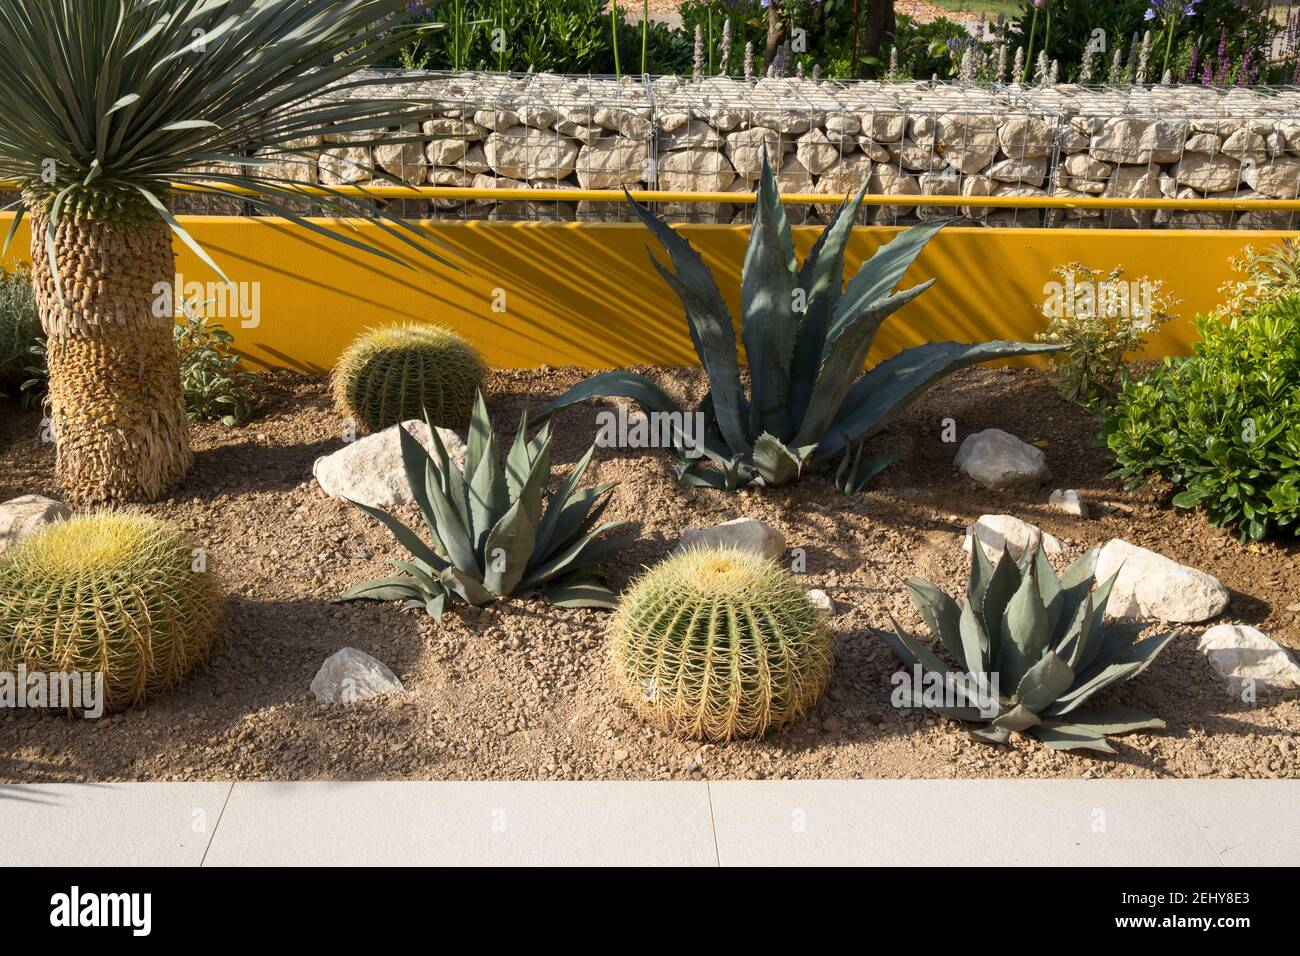 dry crushed stone gravel bed with drought tolerant planting of cactus garden, Agave americana and Echinocactus grusonii a barrel cactus Stock Photo